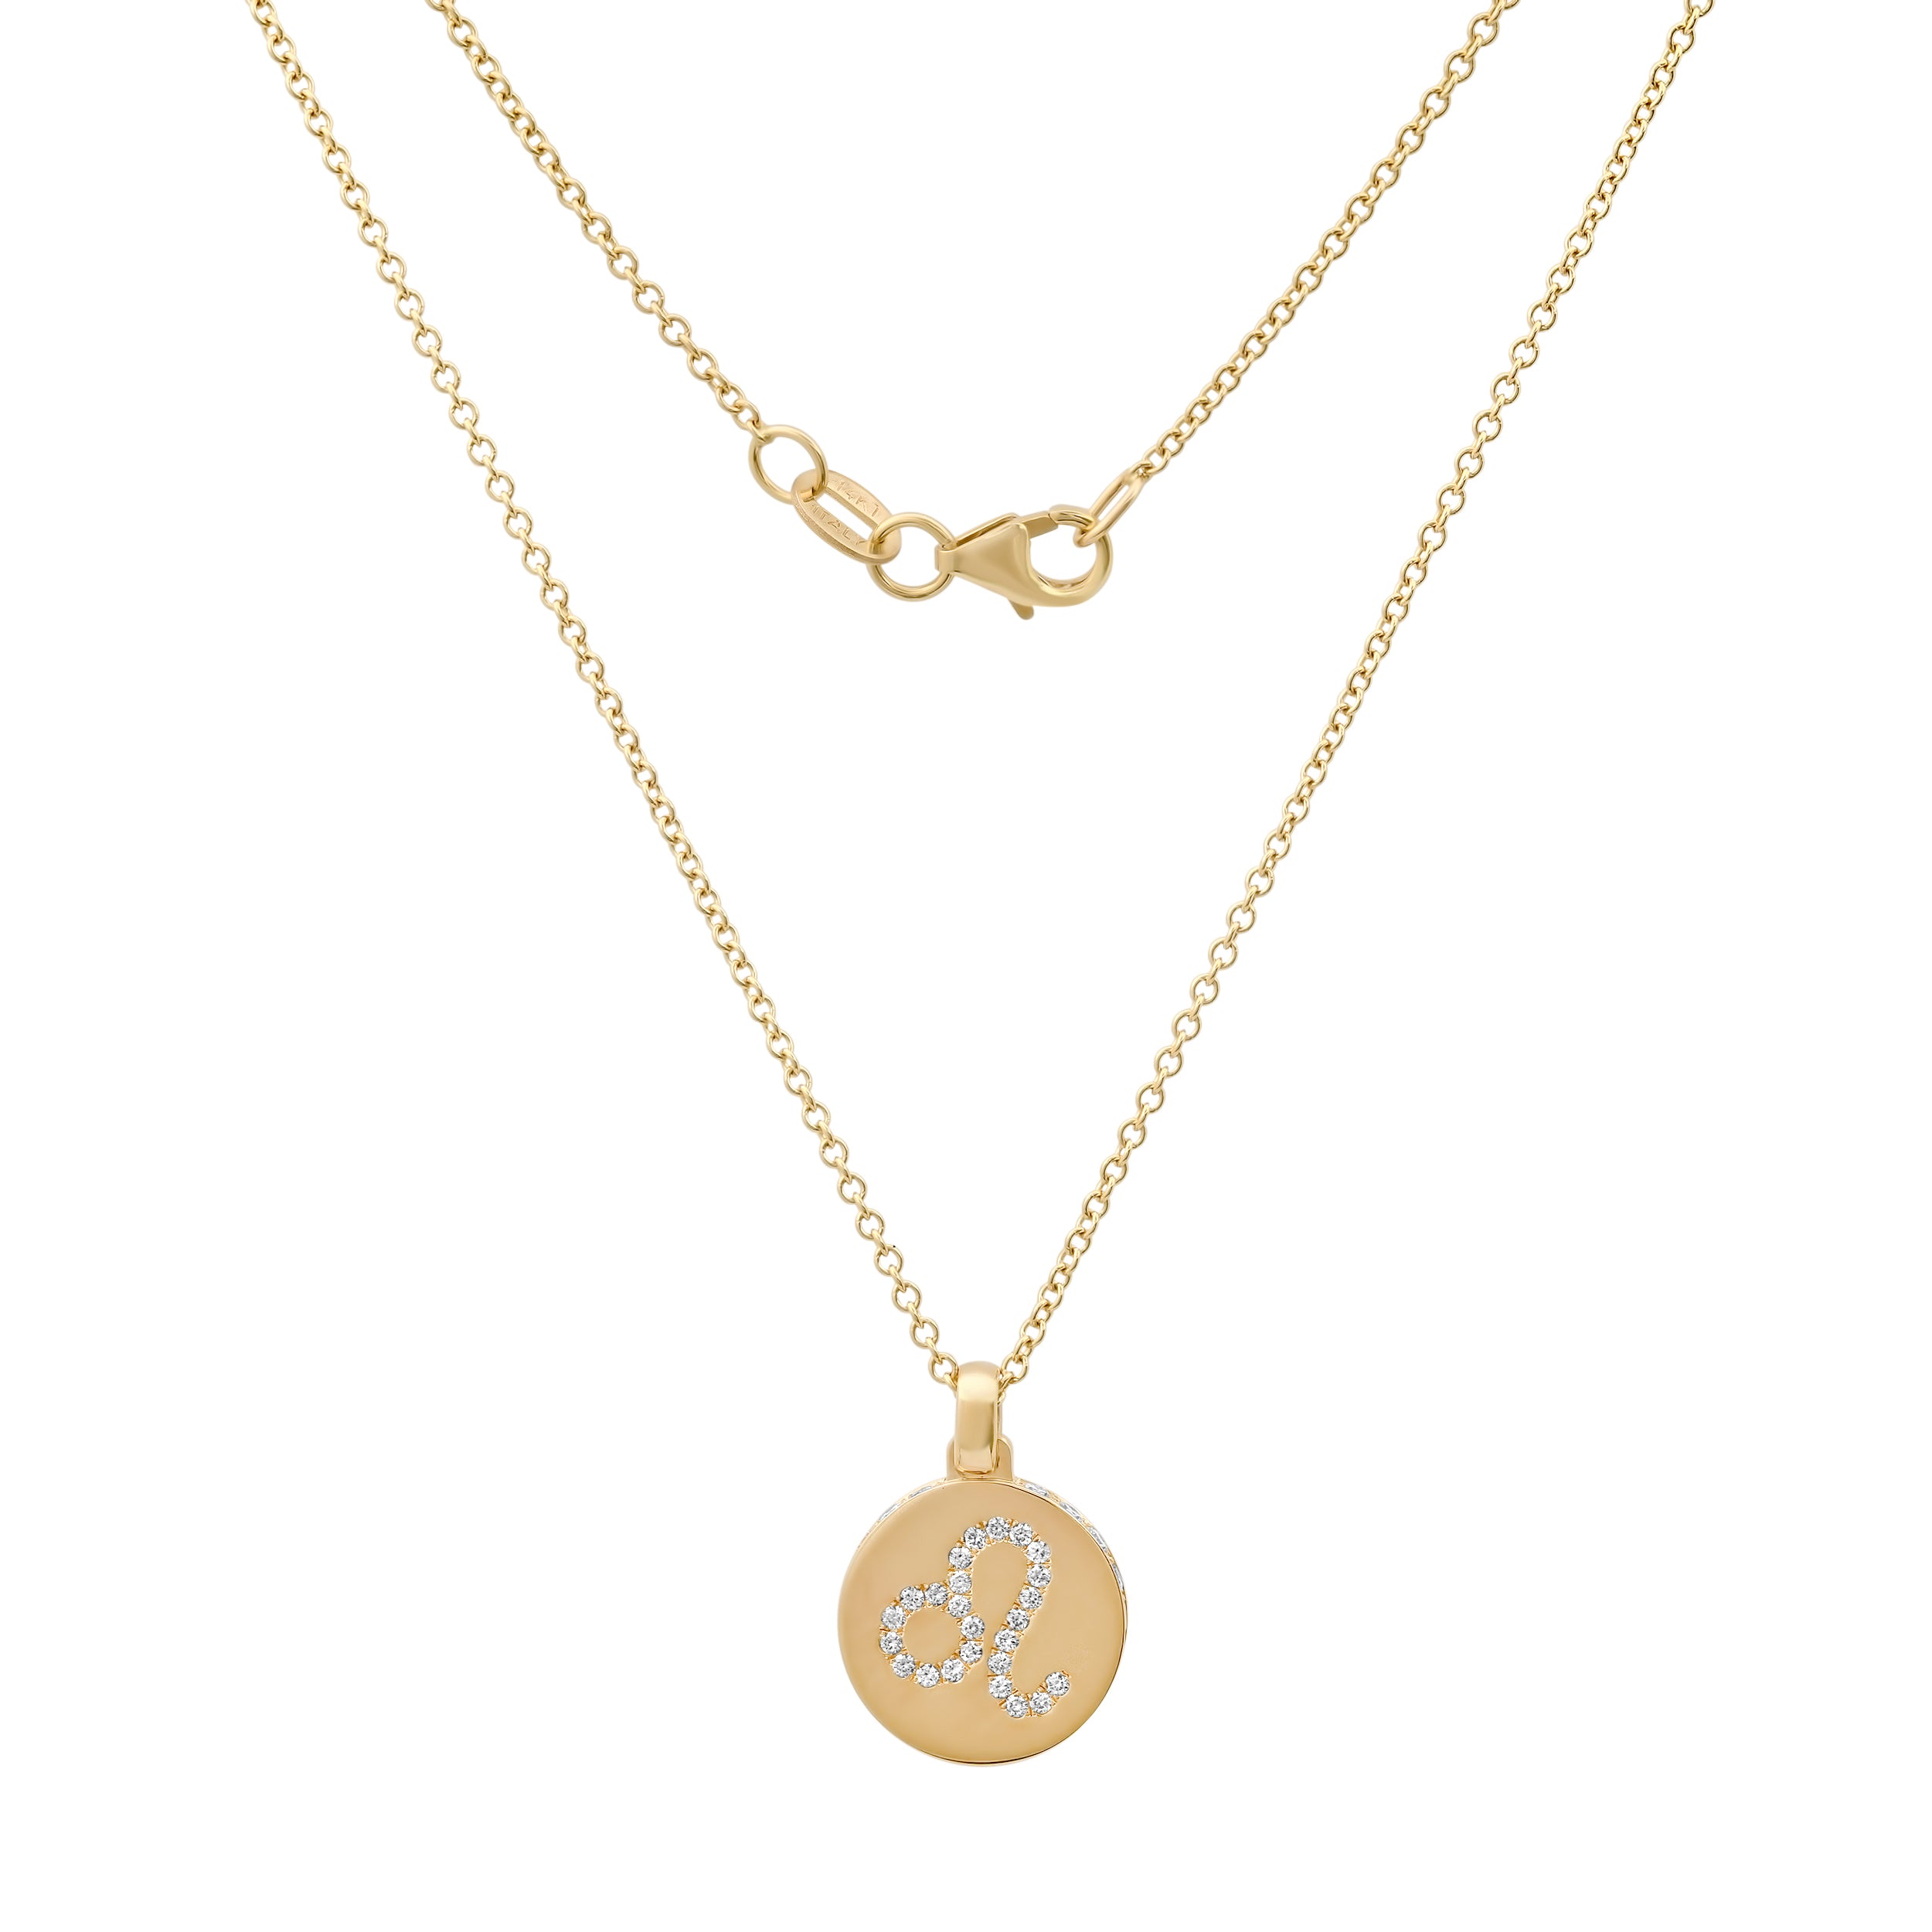 18K YELLOW GOLD DIAMONDS BY THE INCH 3 STATION FLOWER NECKLACE - Roberto  Coin - North America